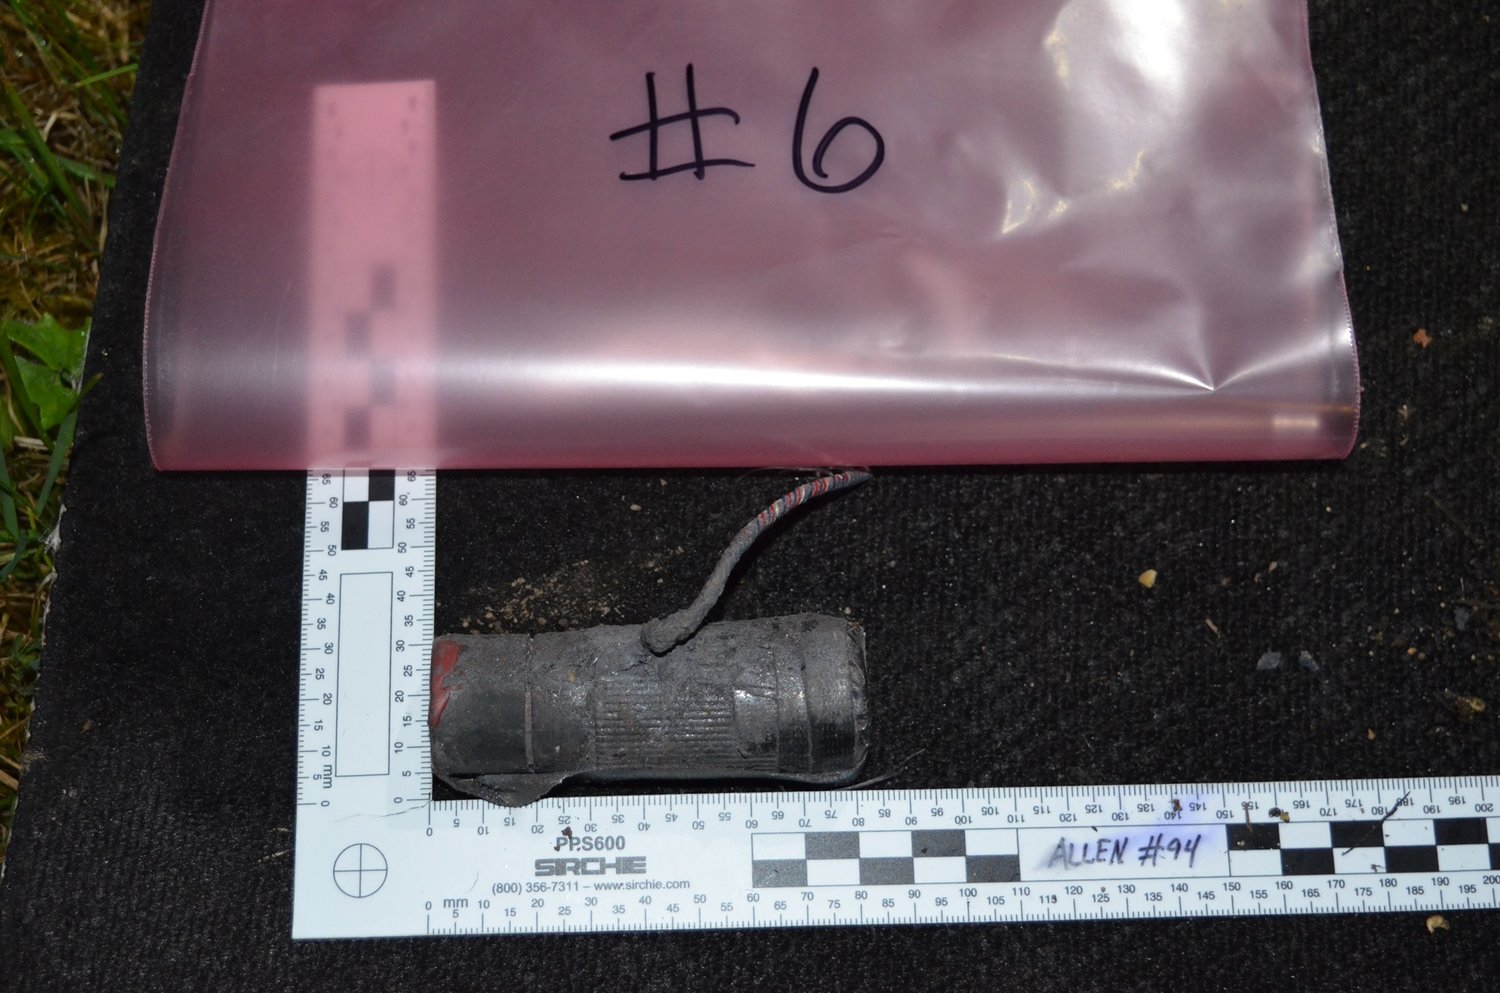 A homemade explosive device found by detectives at the scene of the explosions Tuesday night in Port Hadlock.